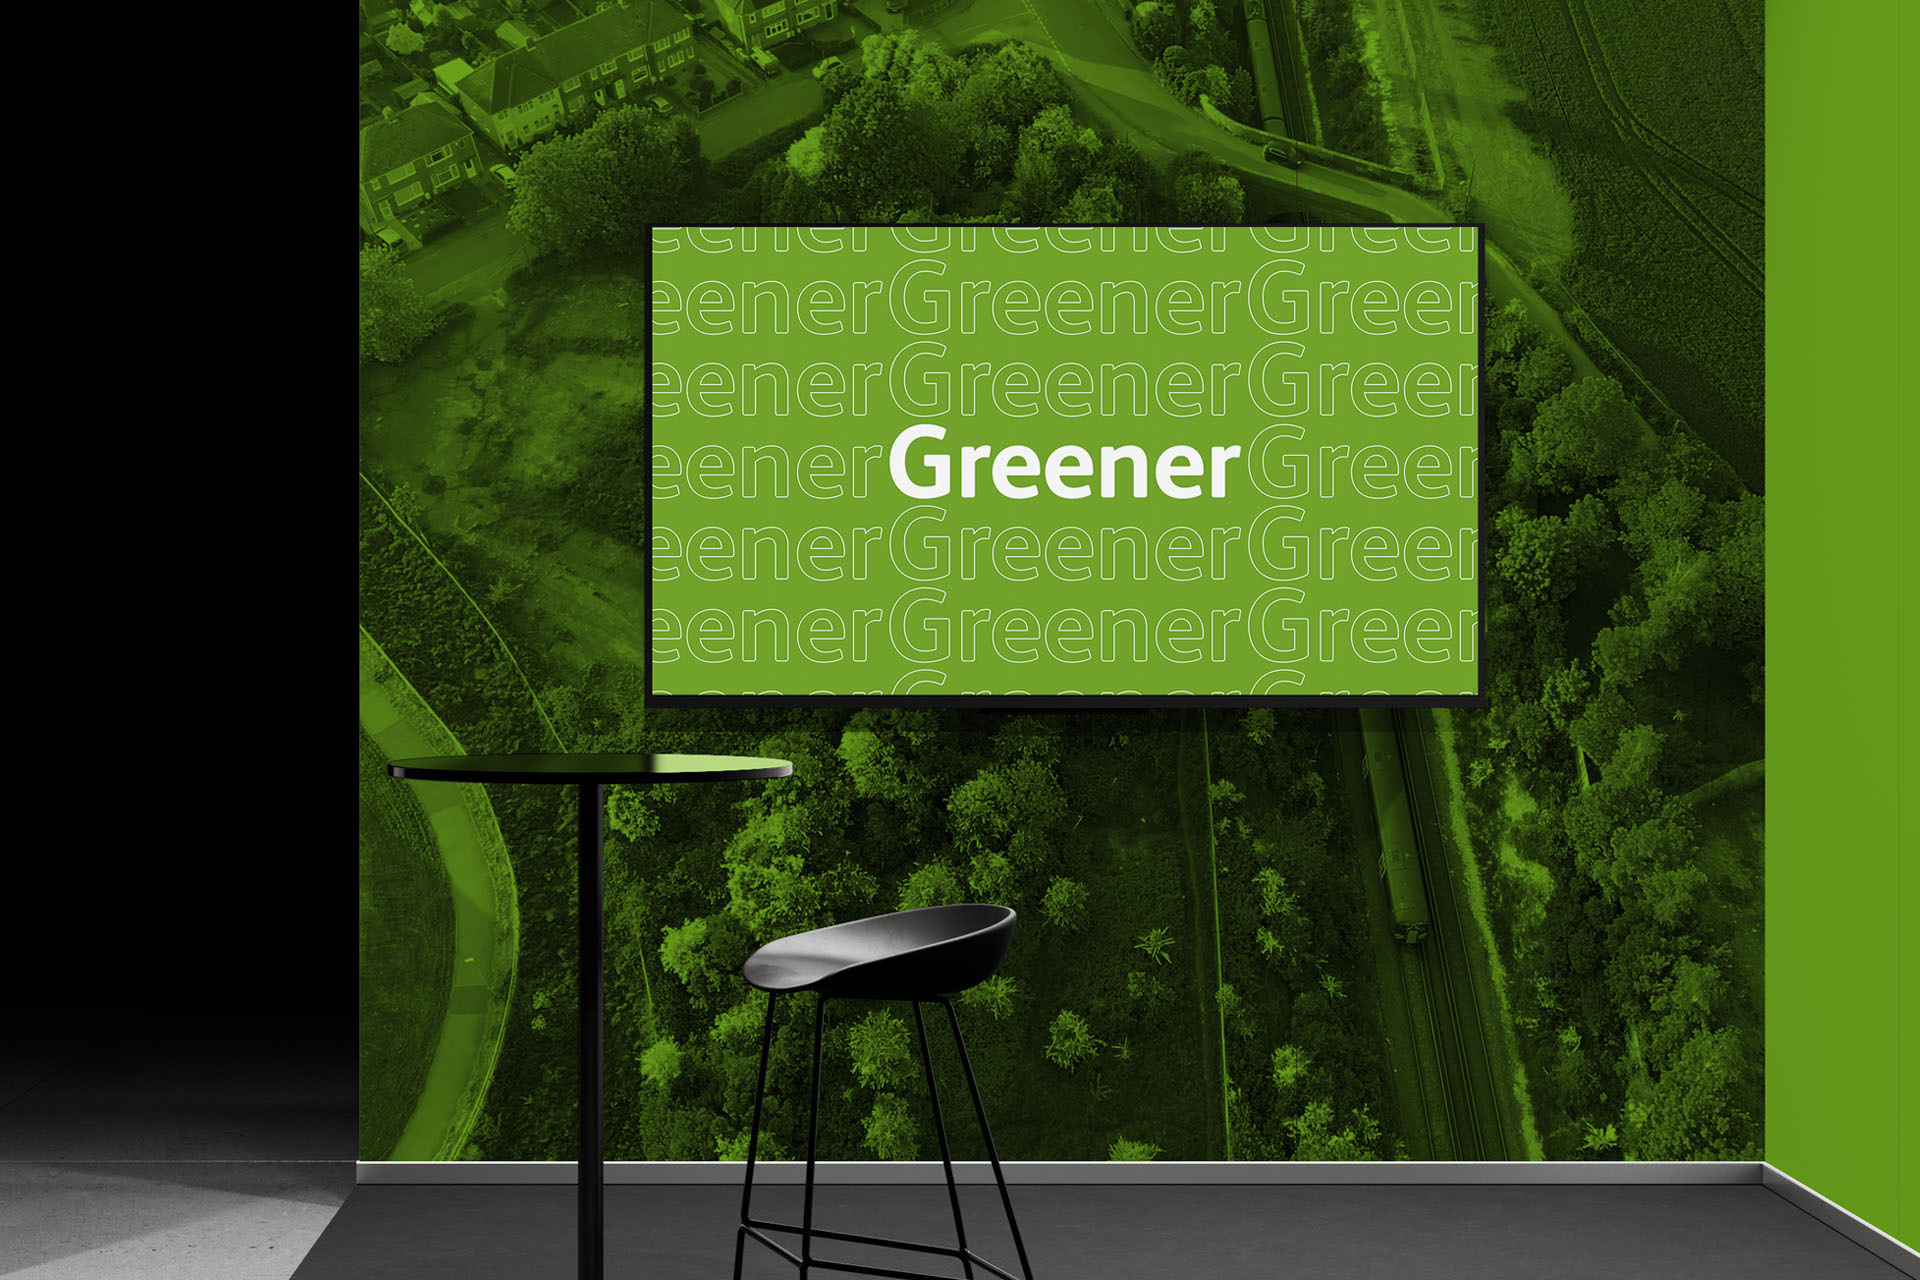 Exhibition mockup with Network Rail Future Railway Video 'green' theme